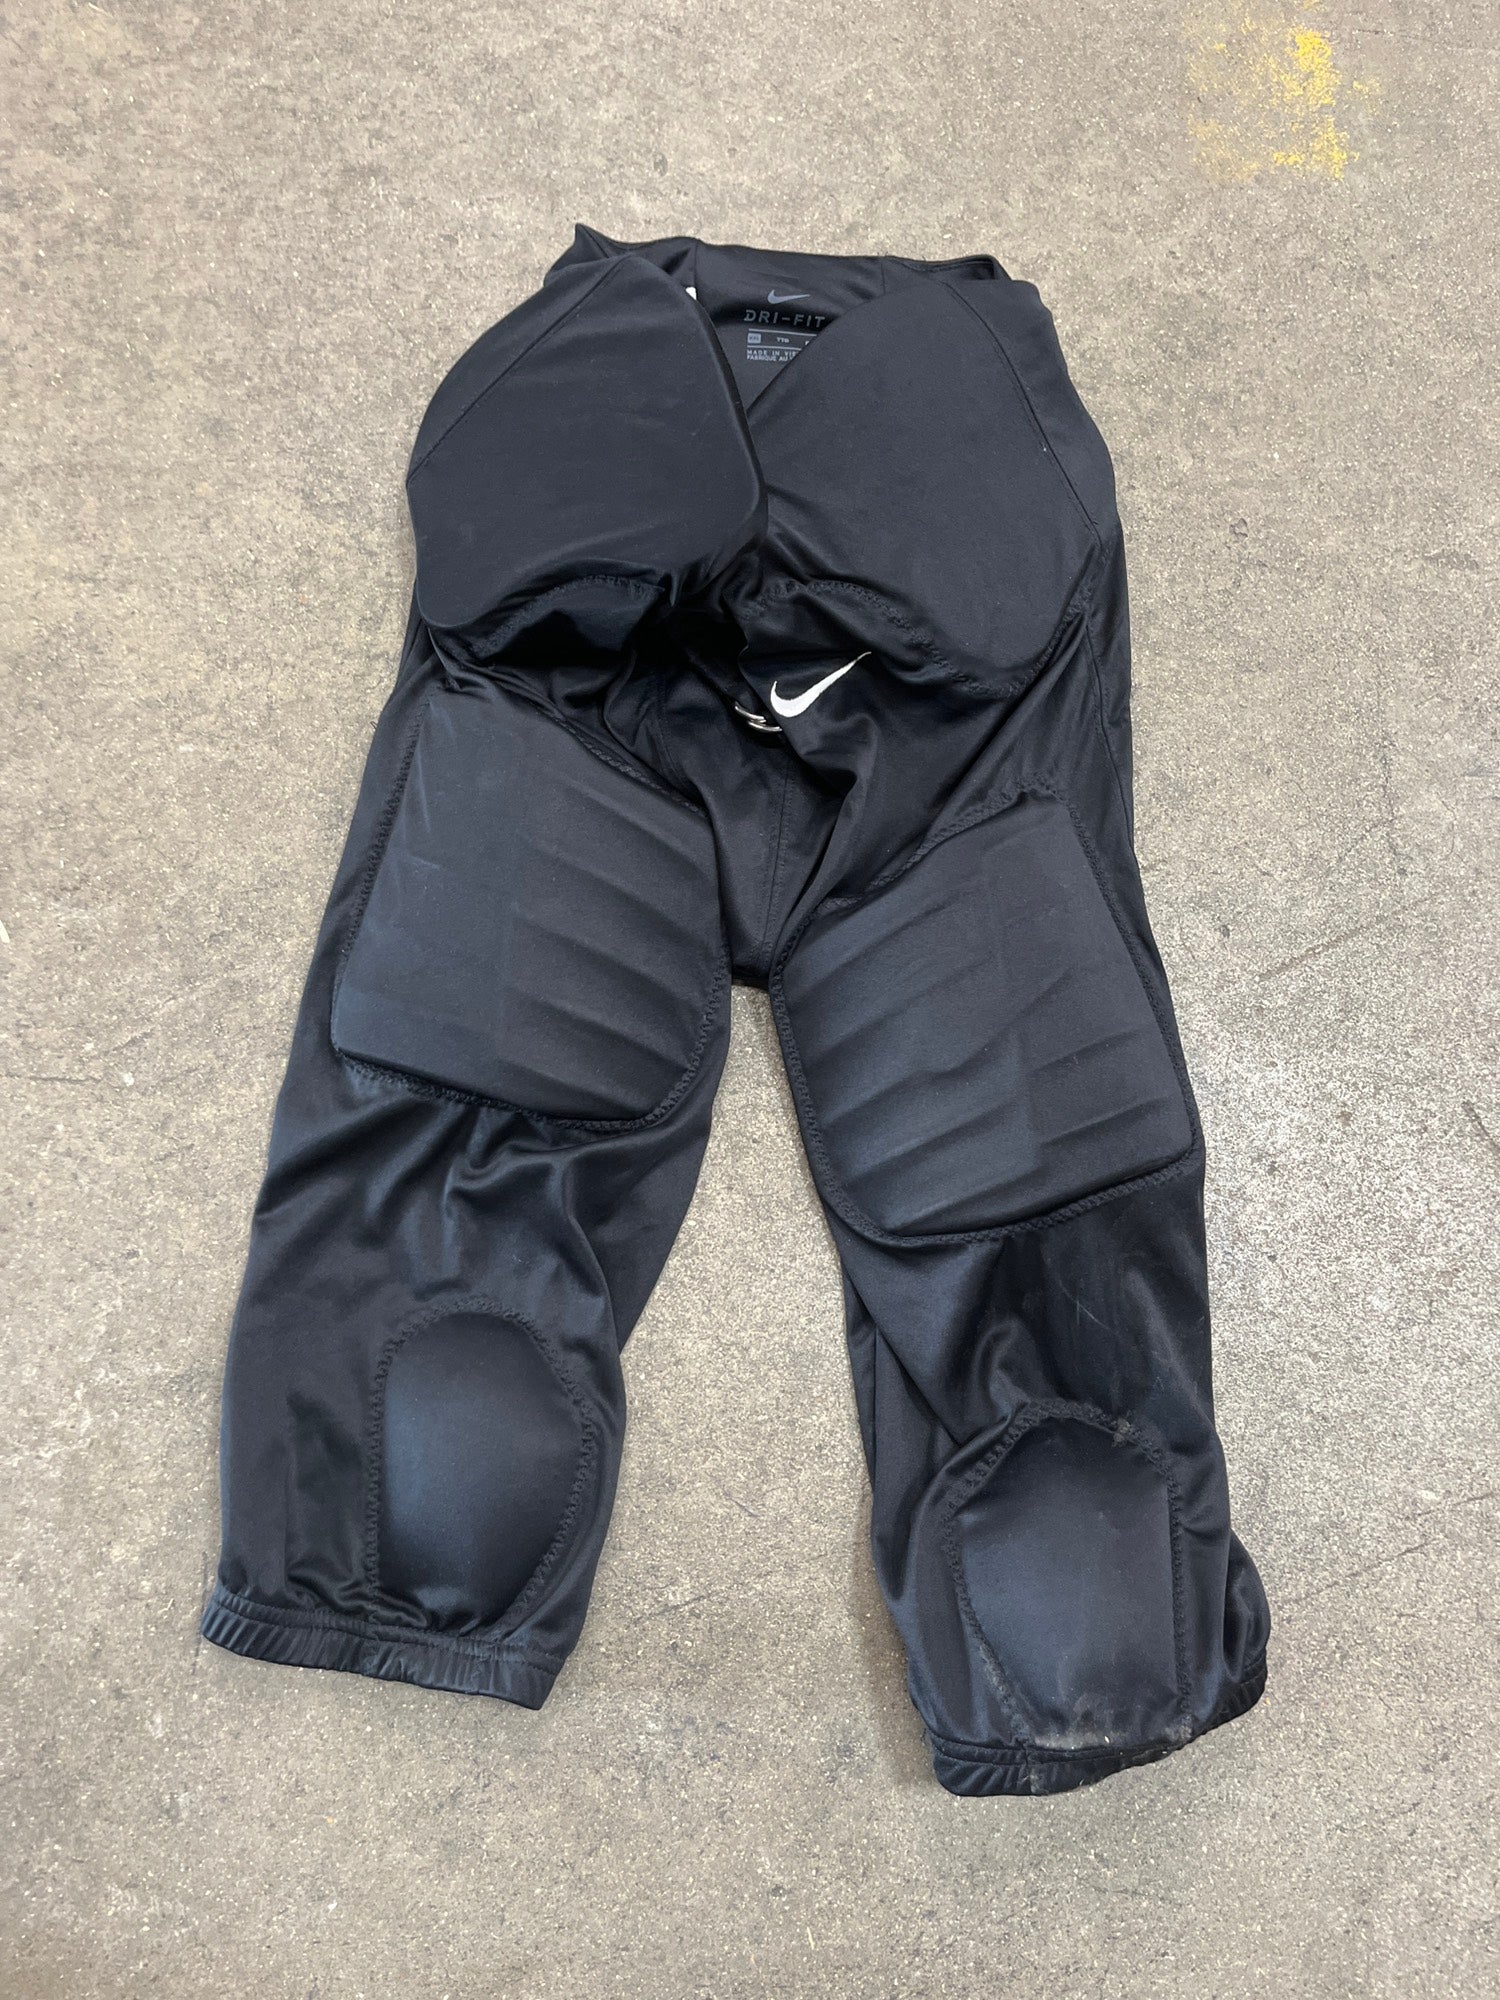 Nike Youth Recruit Integrated 3.0 Football Pants